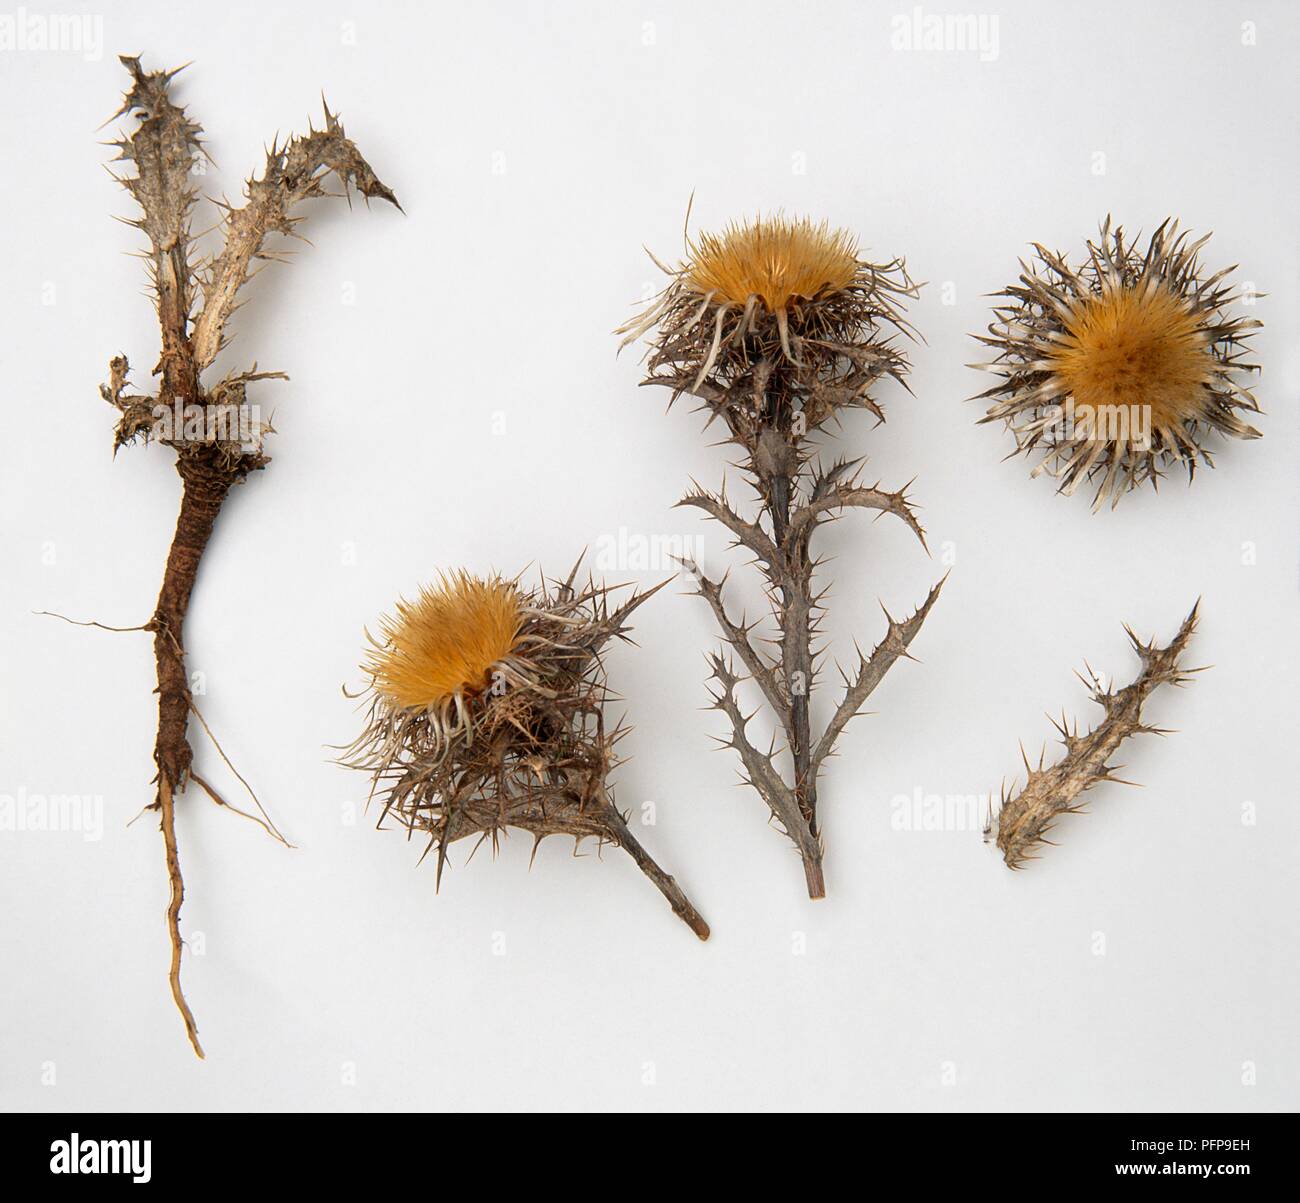 Carlina vulgaris (Carline thistle), roots, leaves and flower heads Stock Photo